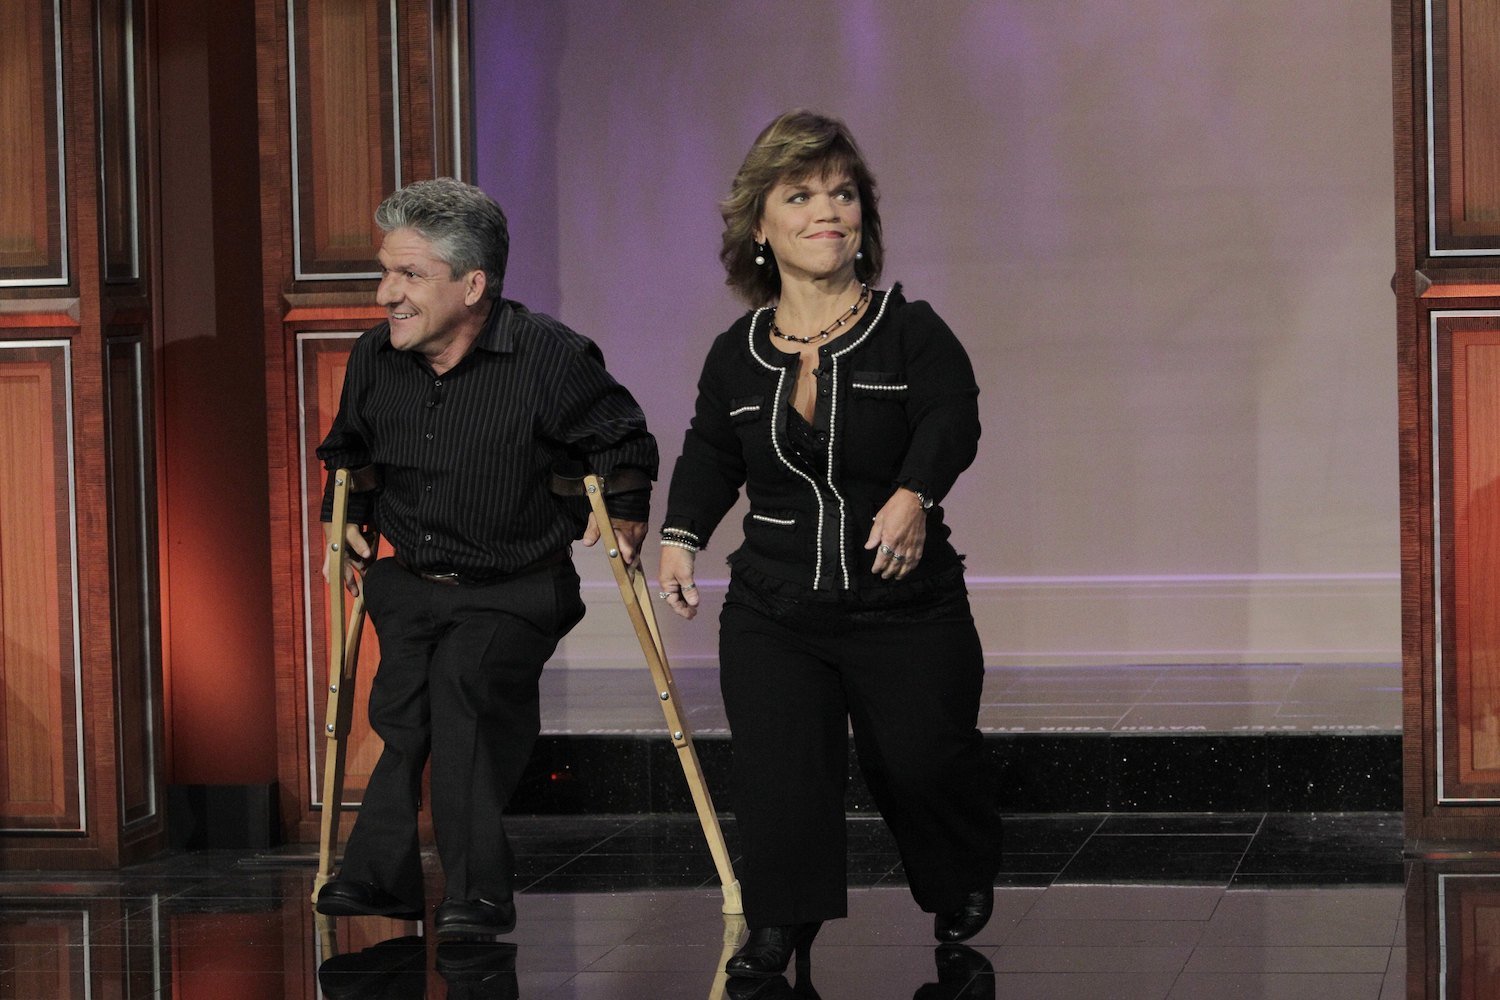 'Little People, Big World' stars Matt and Amy Roloff walking on the stage of a talk show